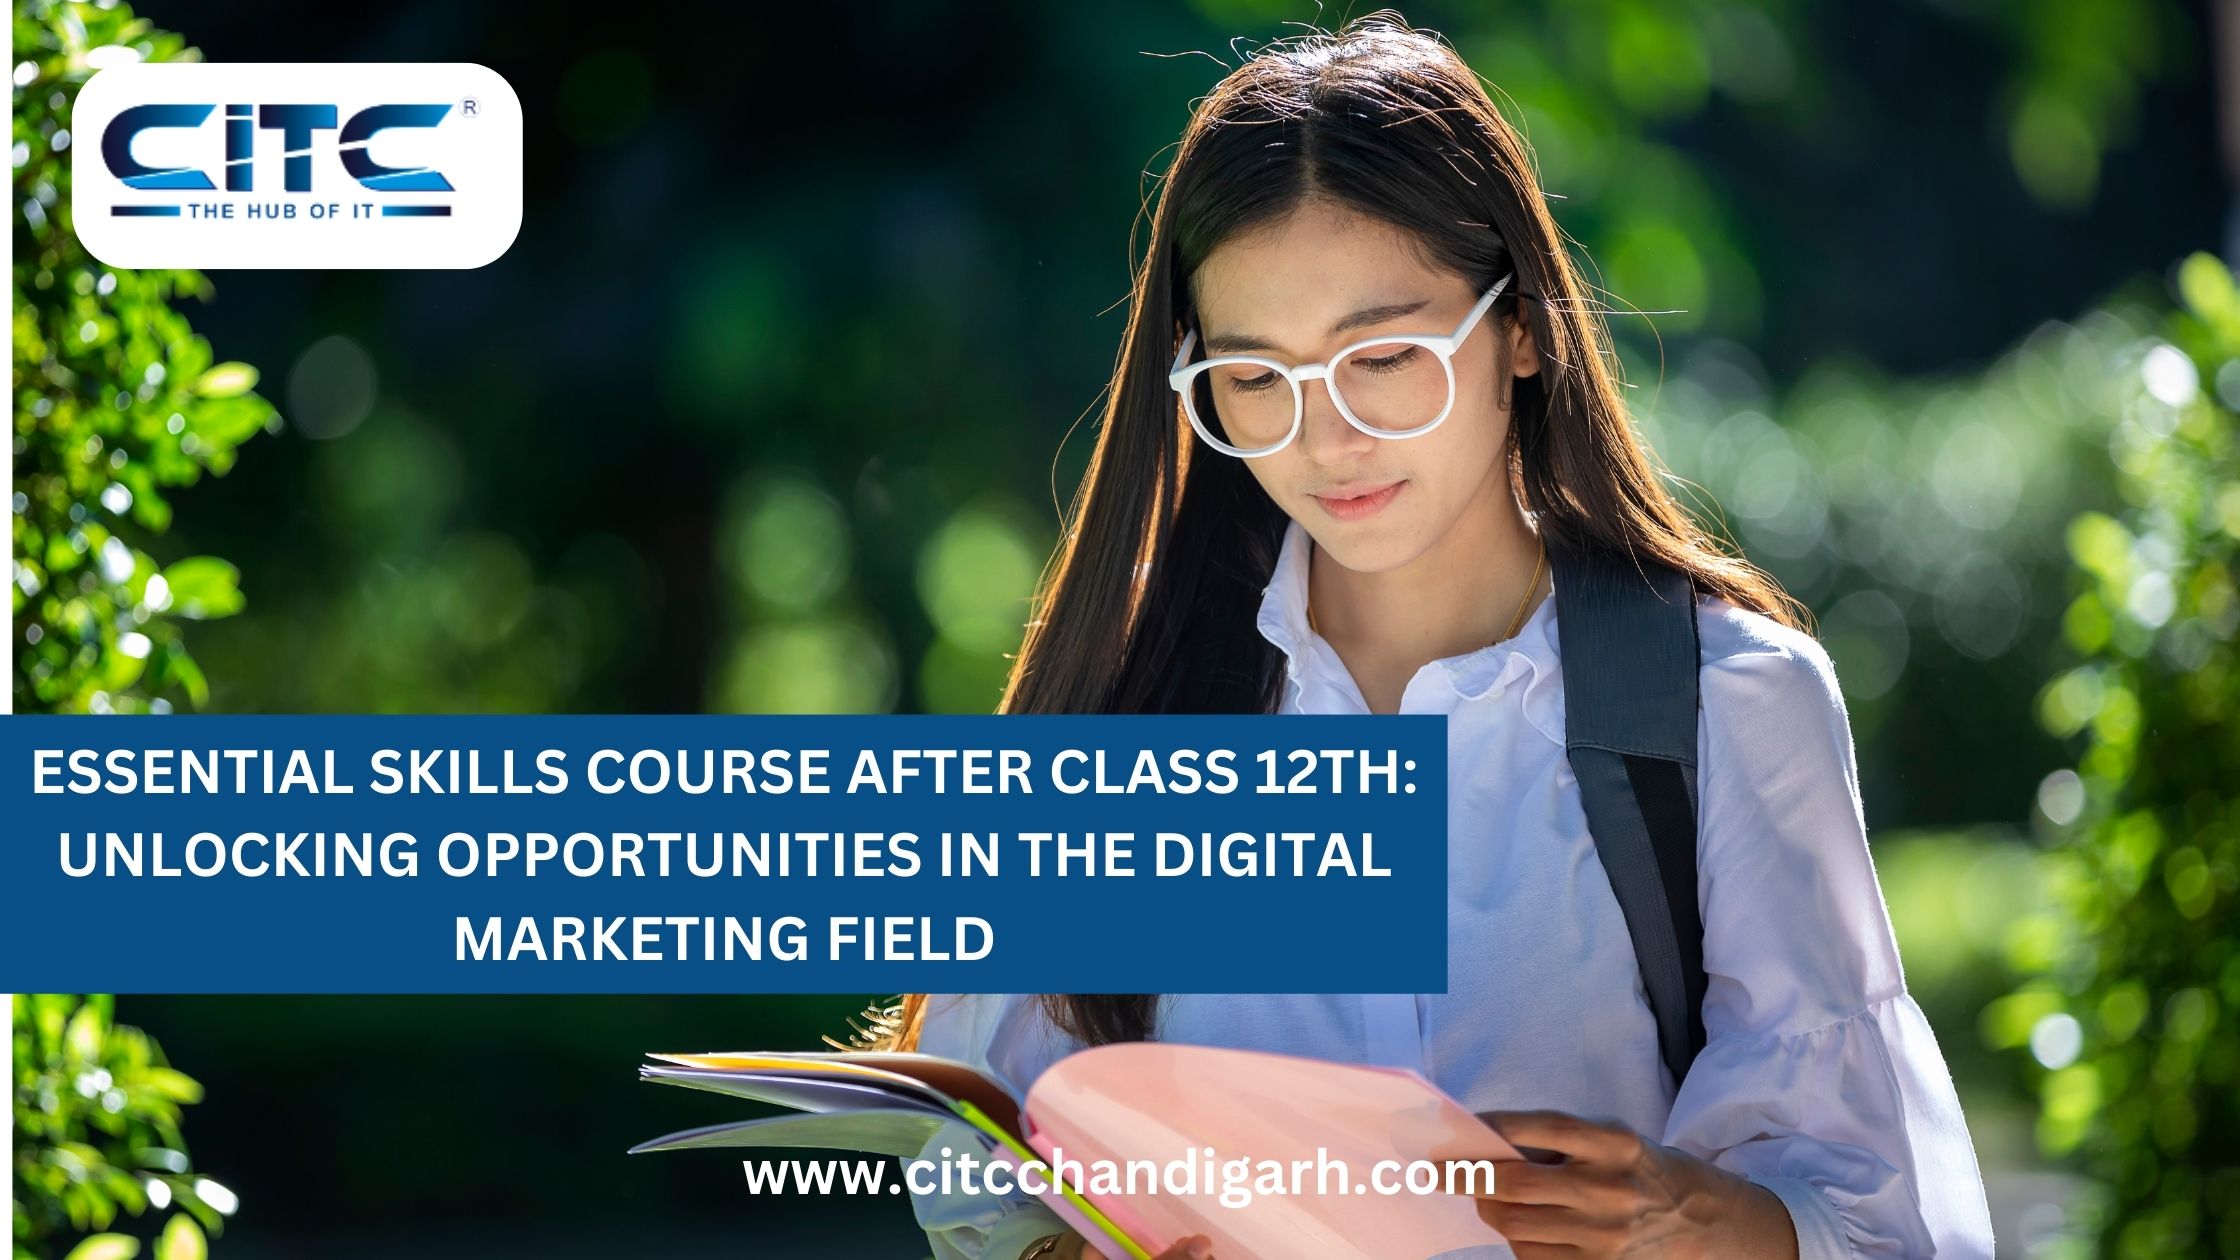 Essential Skills Course after Class 12th: Unlocking Opportunities in the Digital Marketing Field